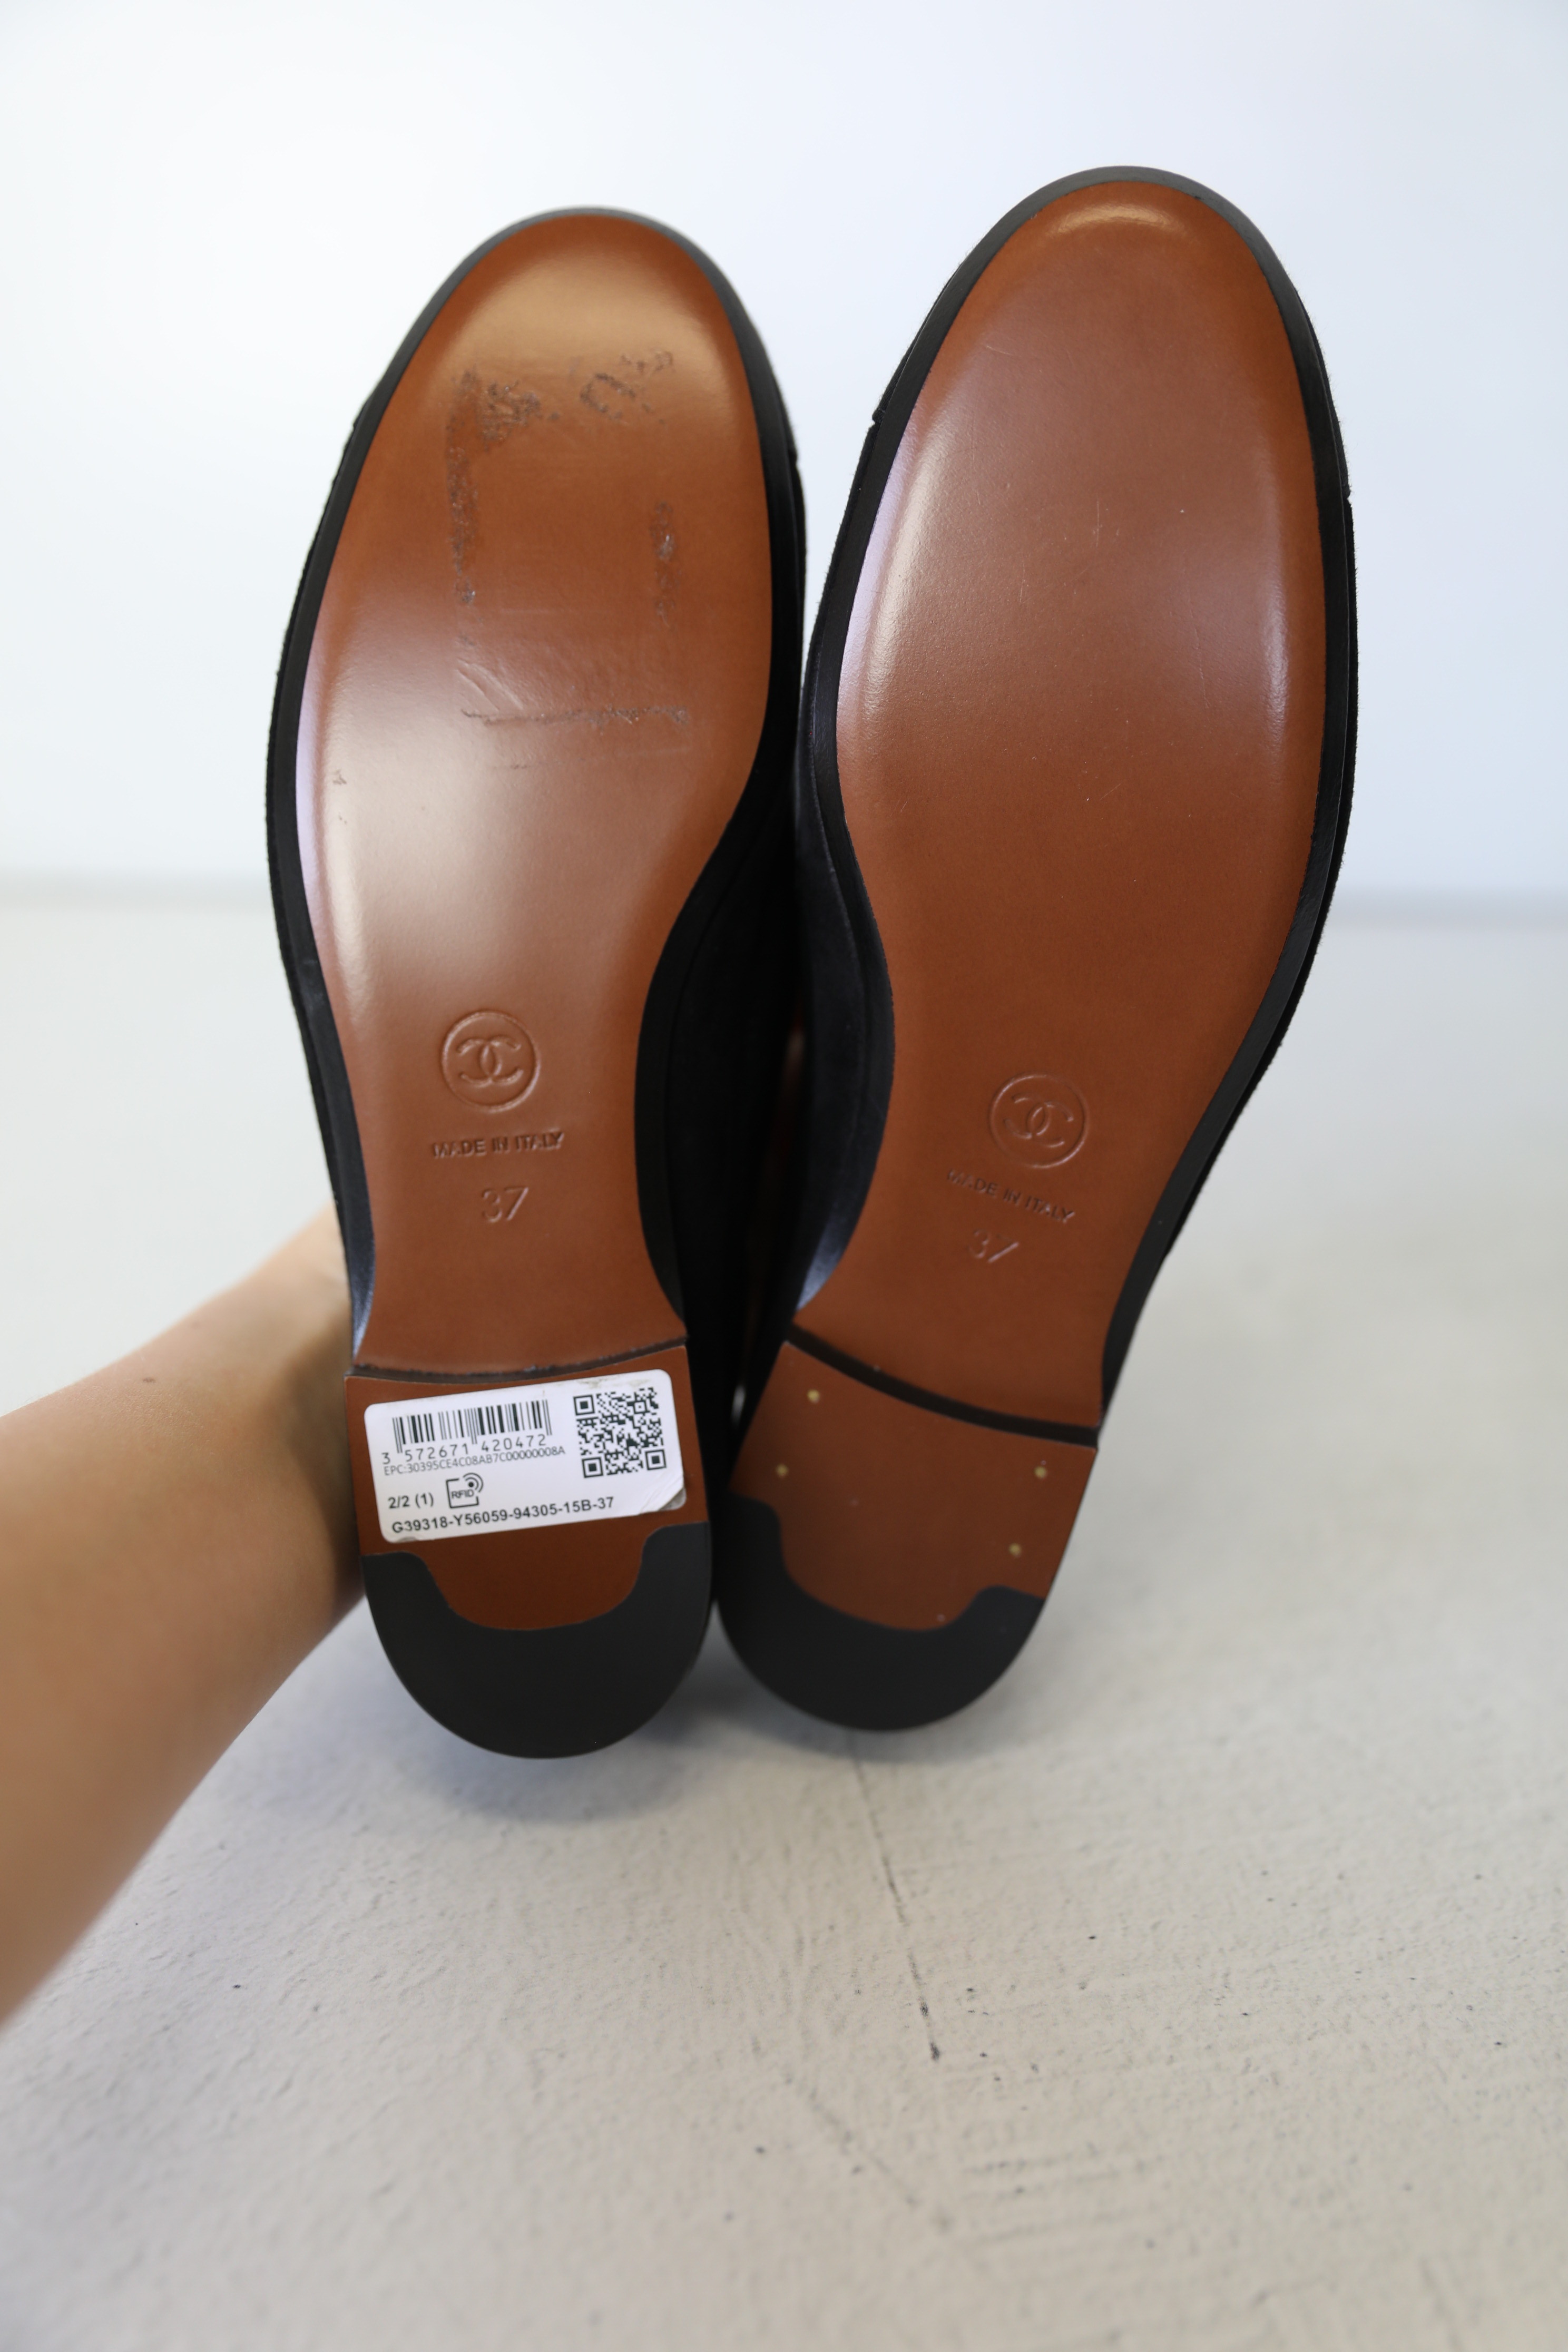 Chanel Shoes Loafers, Black Calfskin with Vine CC, Size 37, New in Box WA001